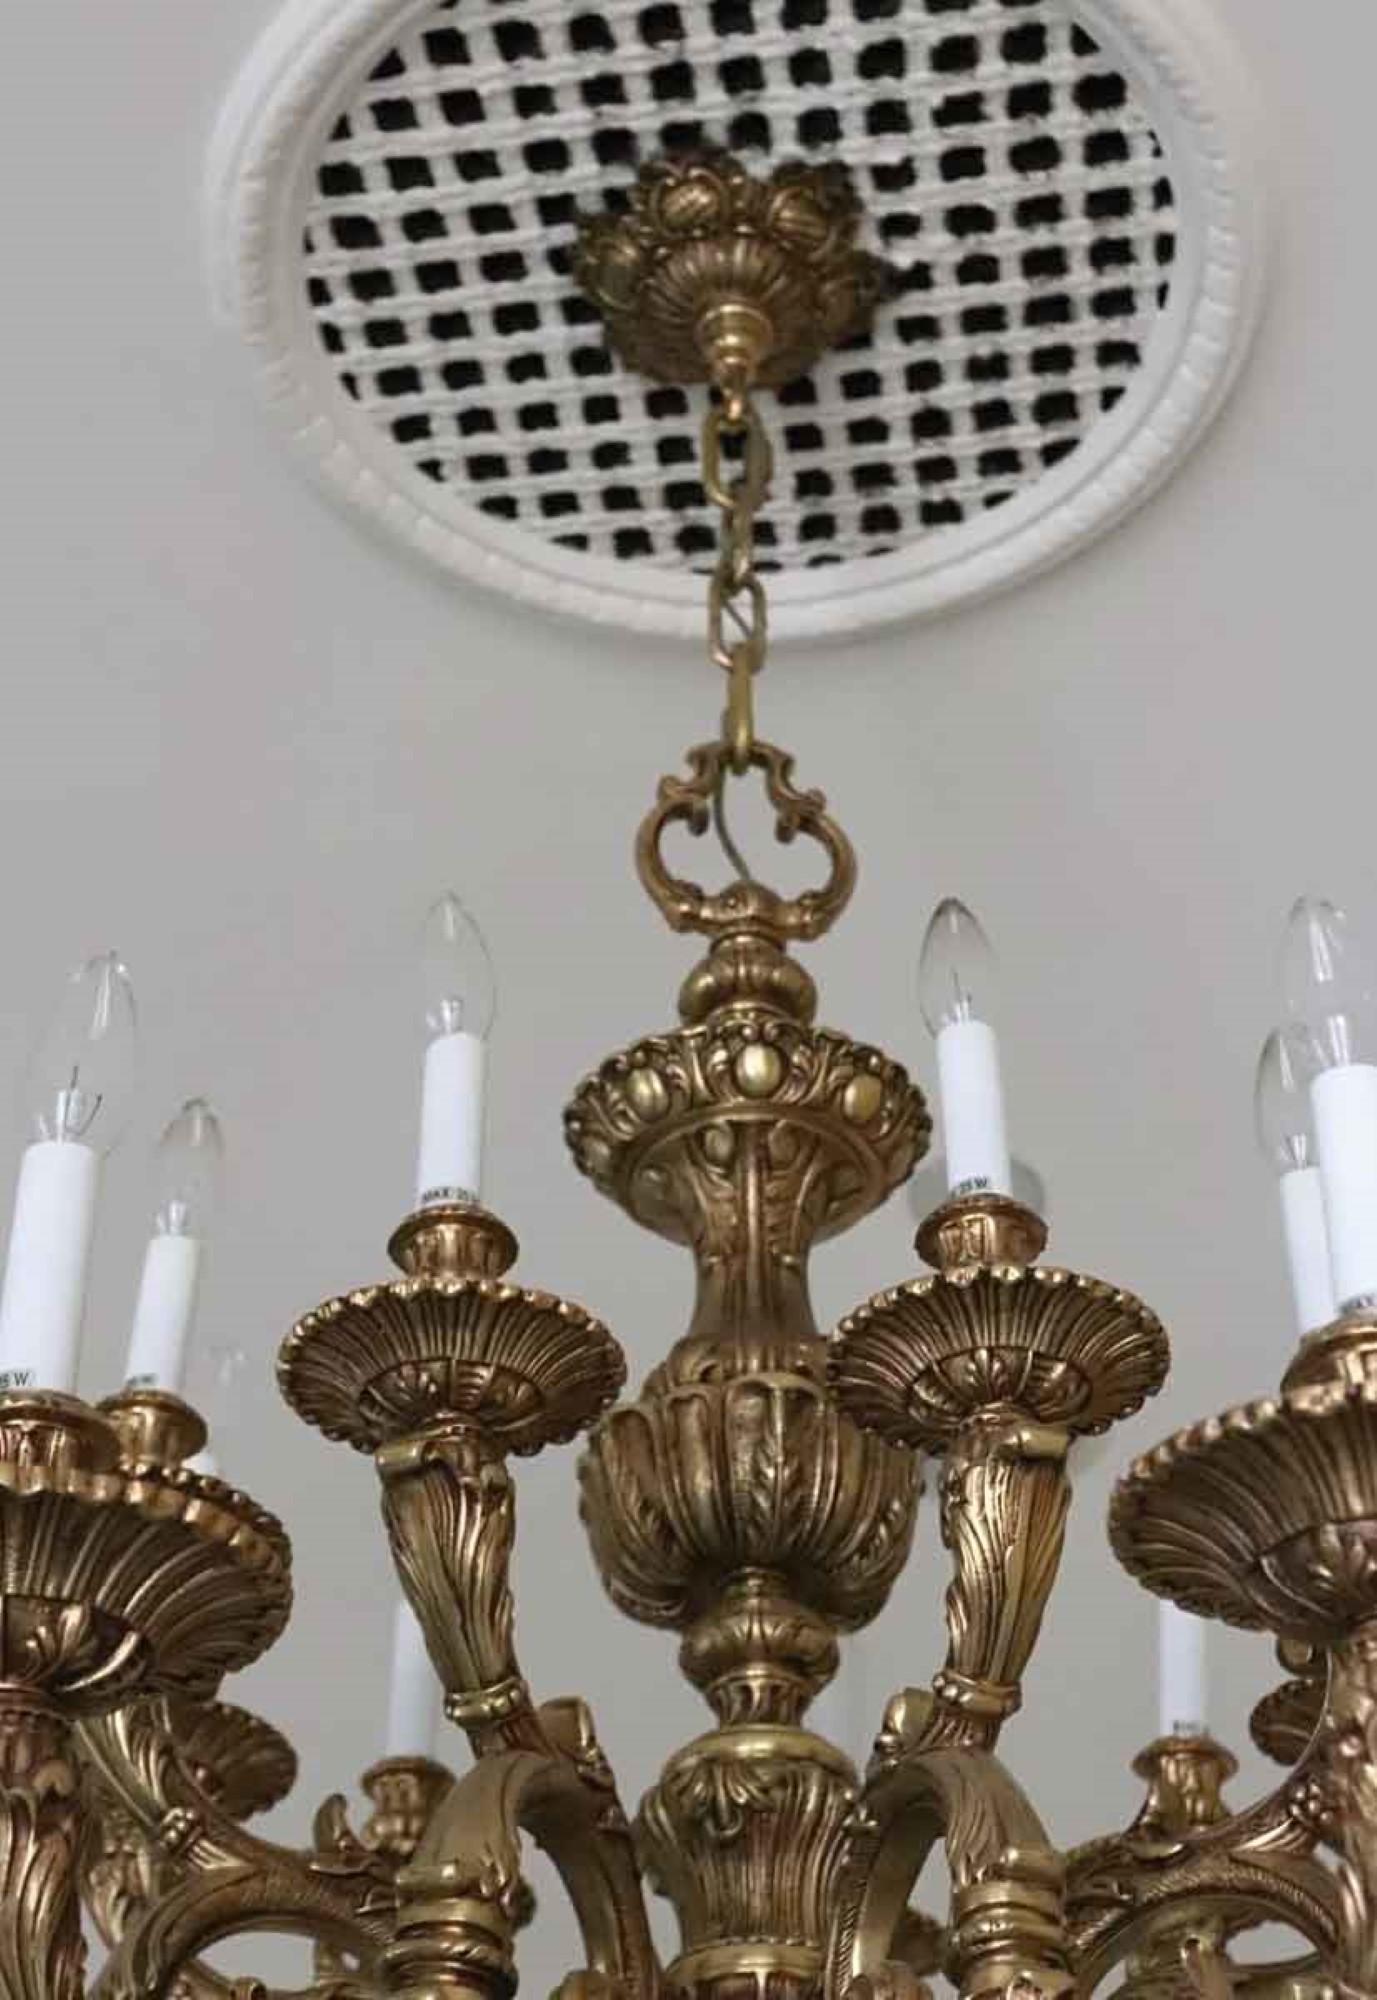 This bronze chandelier is heavily cast and is decorated with six arms and 18 lights. Elaborate details grace this piece which was carefully removed from the Waldorf Astoria banquet room on the 18th floor. A Waldorf Astoria authenticity card included